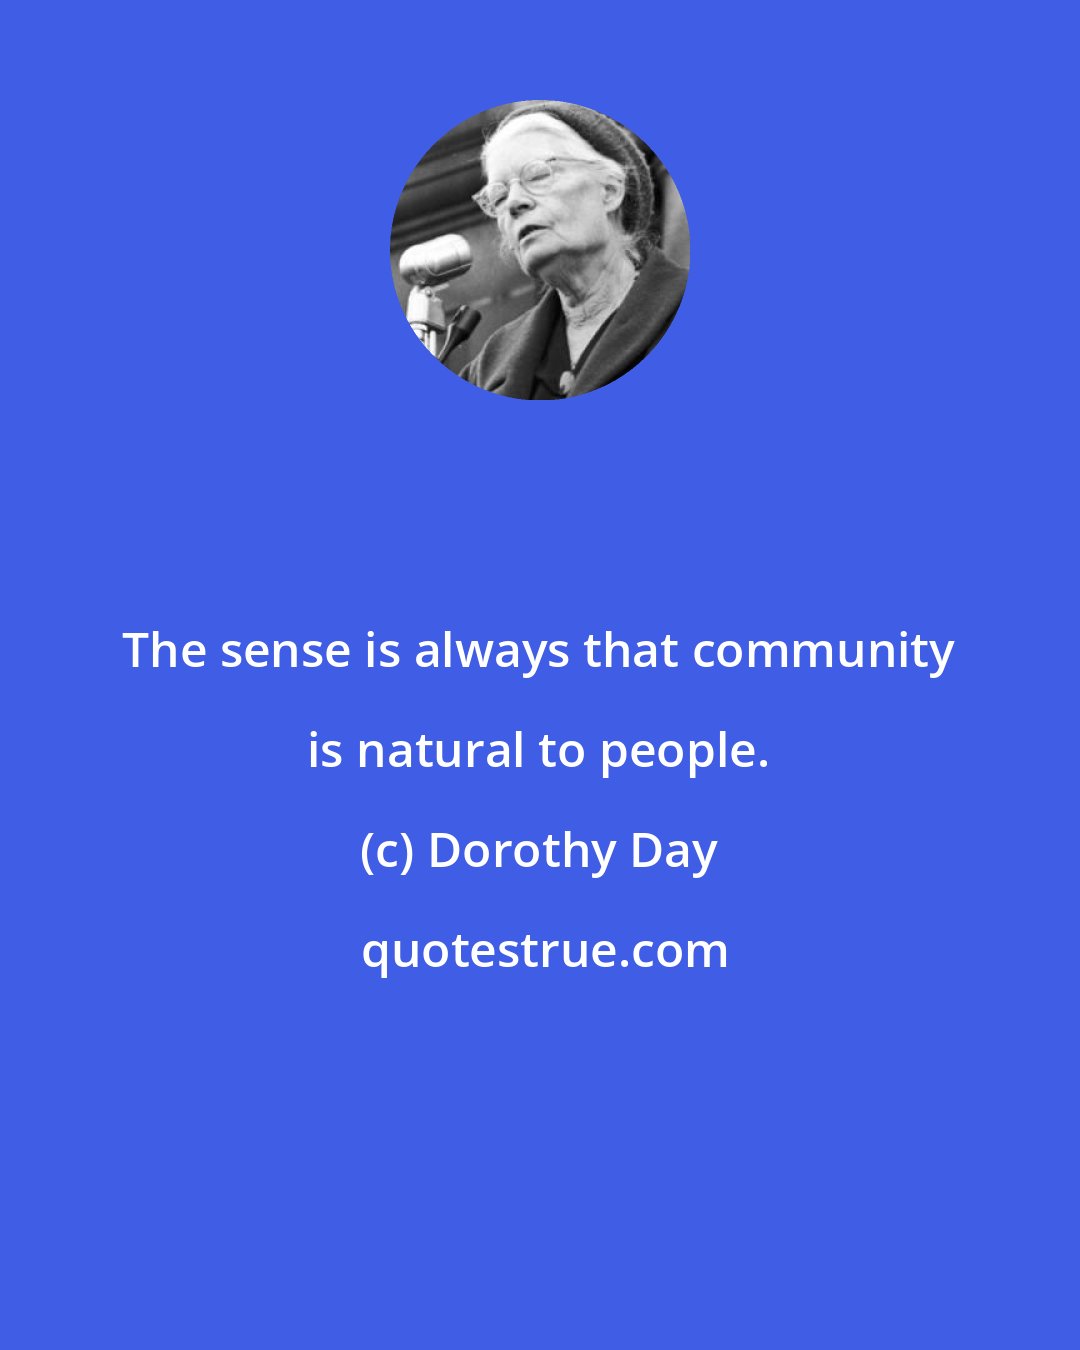 Dorothy Day: The sense is always that community is natural to people.